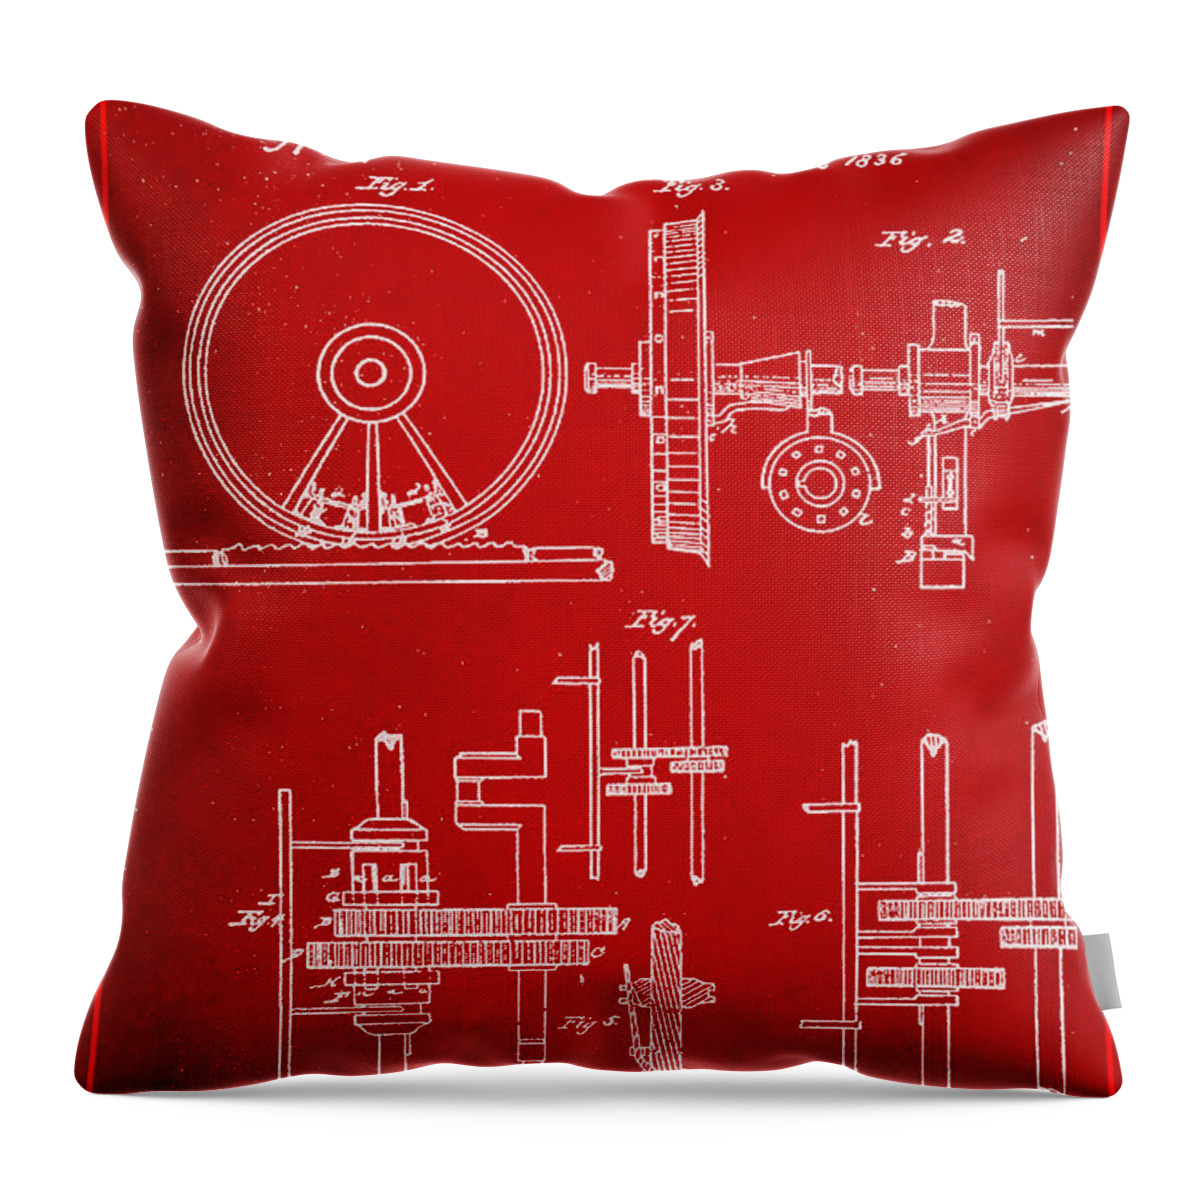 Patent Throw Pillow featuring the mixed media Traction Wheels Patent Drawing 1b by Brian Reaves